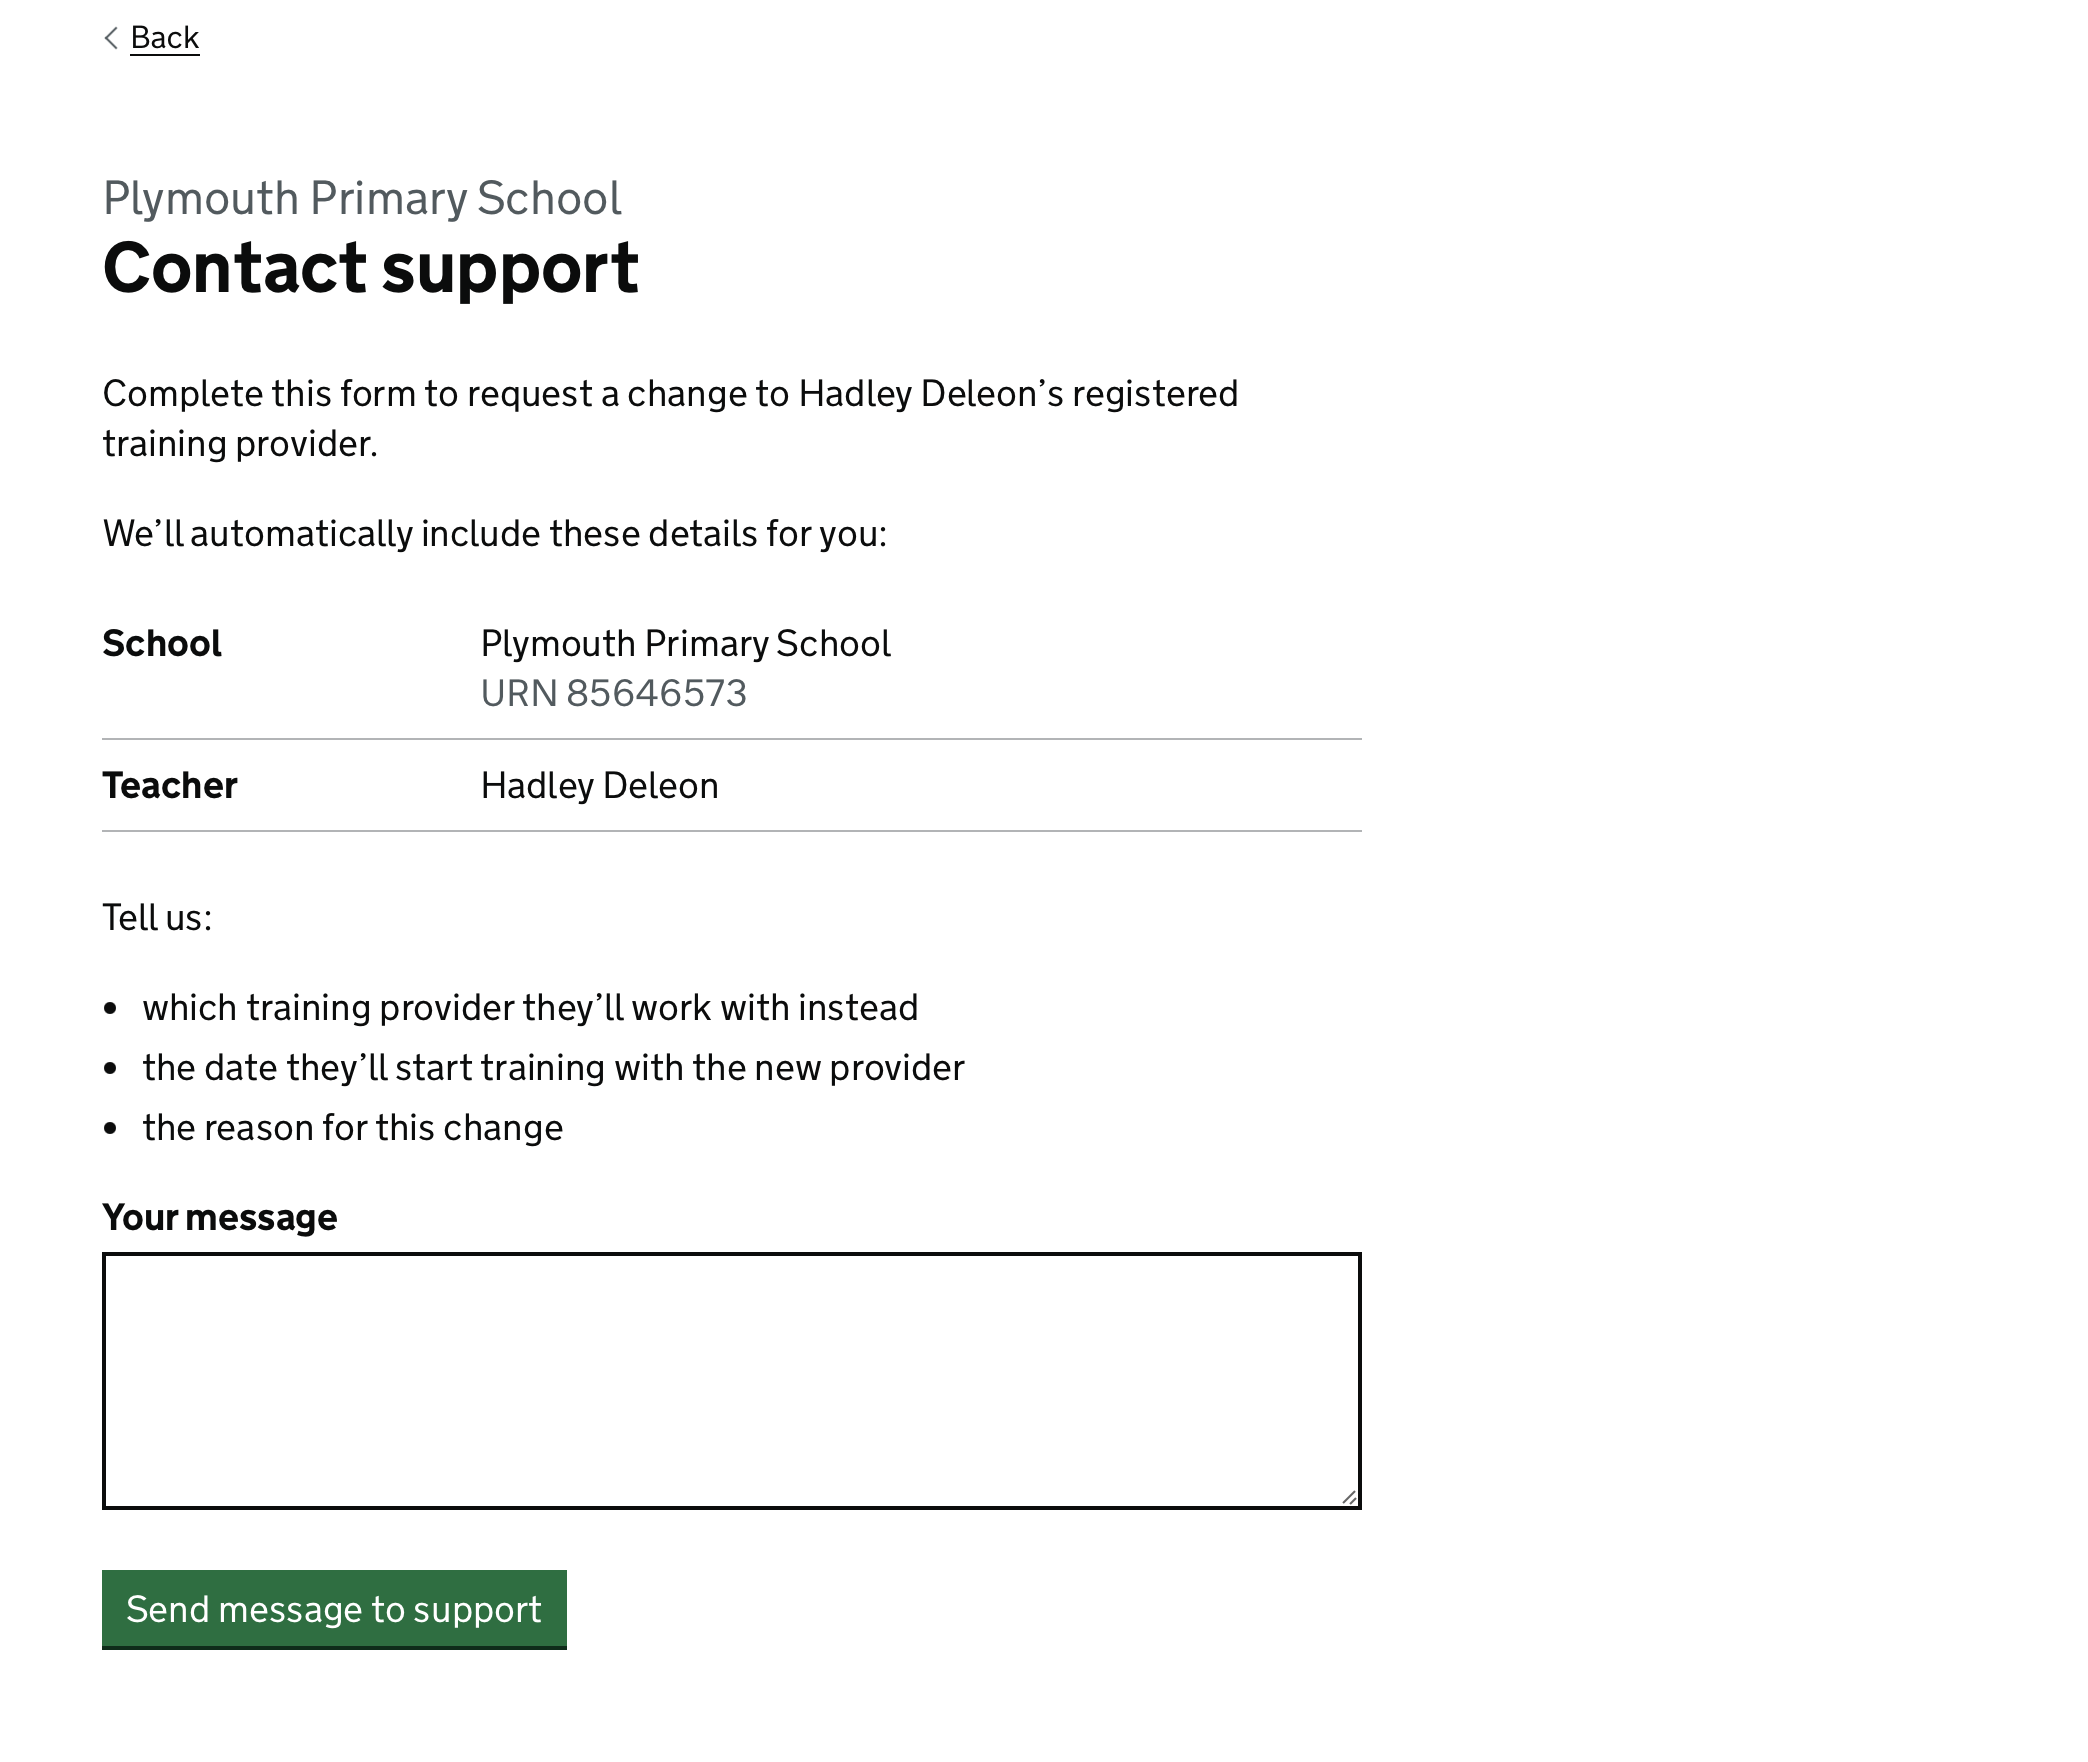 Screenshot showing a page titled Contact support, followed by ‘Complete this form to request a change to Hadley Deleon’s registered training provider. We’ll automatically include these details for you: their school name and URN, and the name of the Teacher. Tell us which training provider they'll work with instead, the date they’ll start training with the new provider and the reason for this change’. Beneath this is a text box labelled ‘Your message’ and a green button labelled ‘Send message to support’.